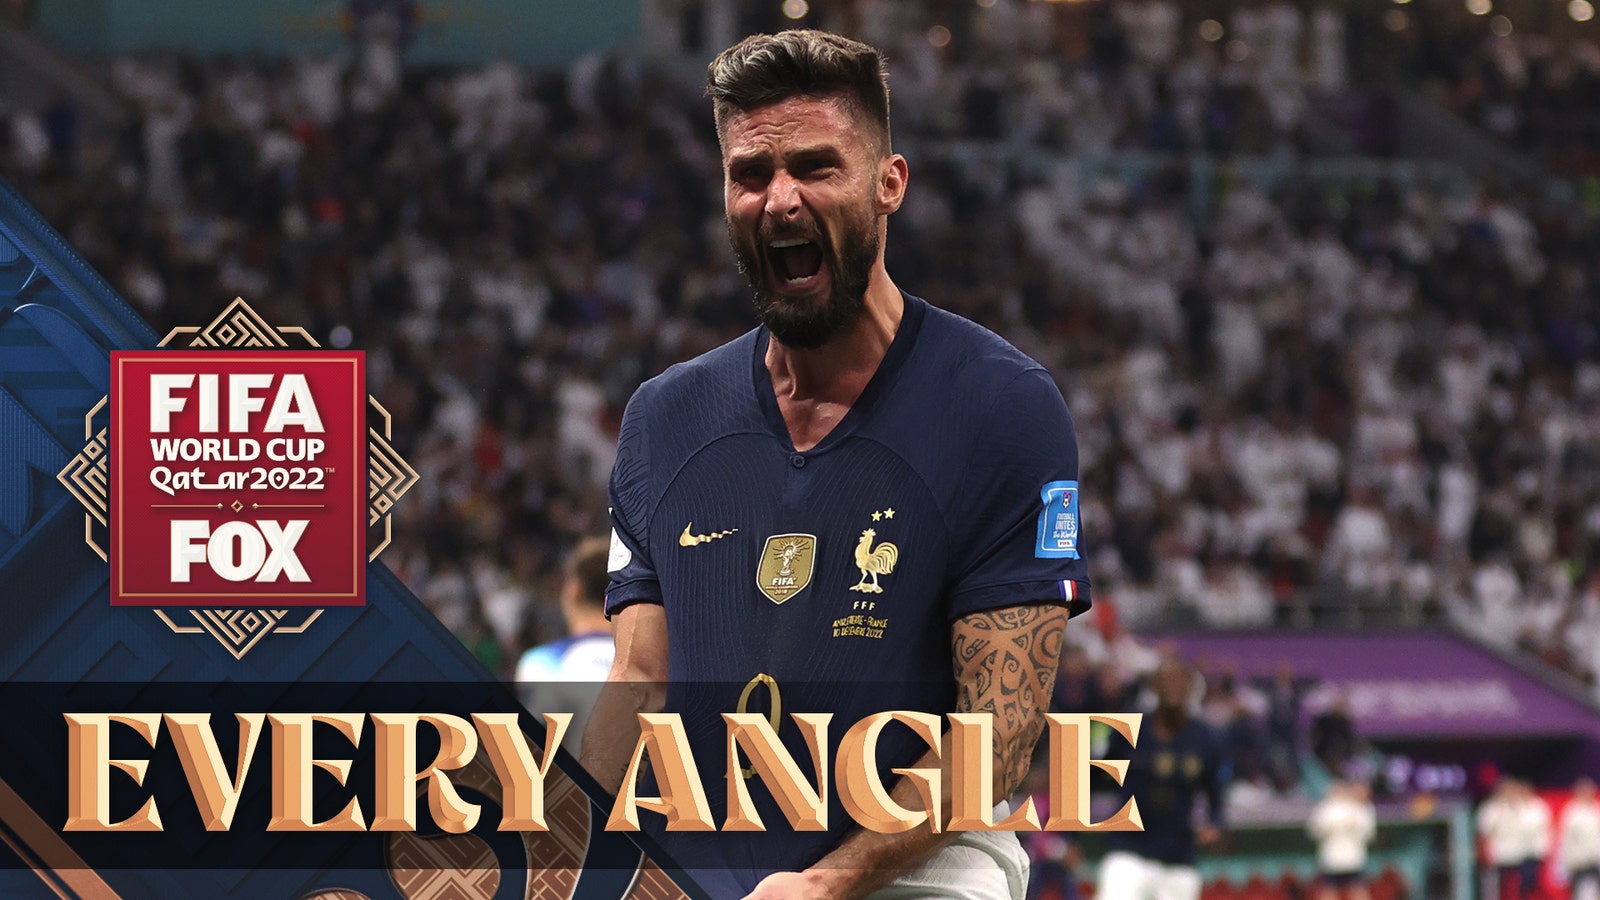 Olivier Giroud delivers a GREAT header to win France at the 2022 FIFA World Cup |  every angle